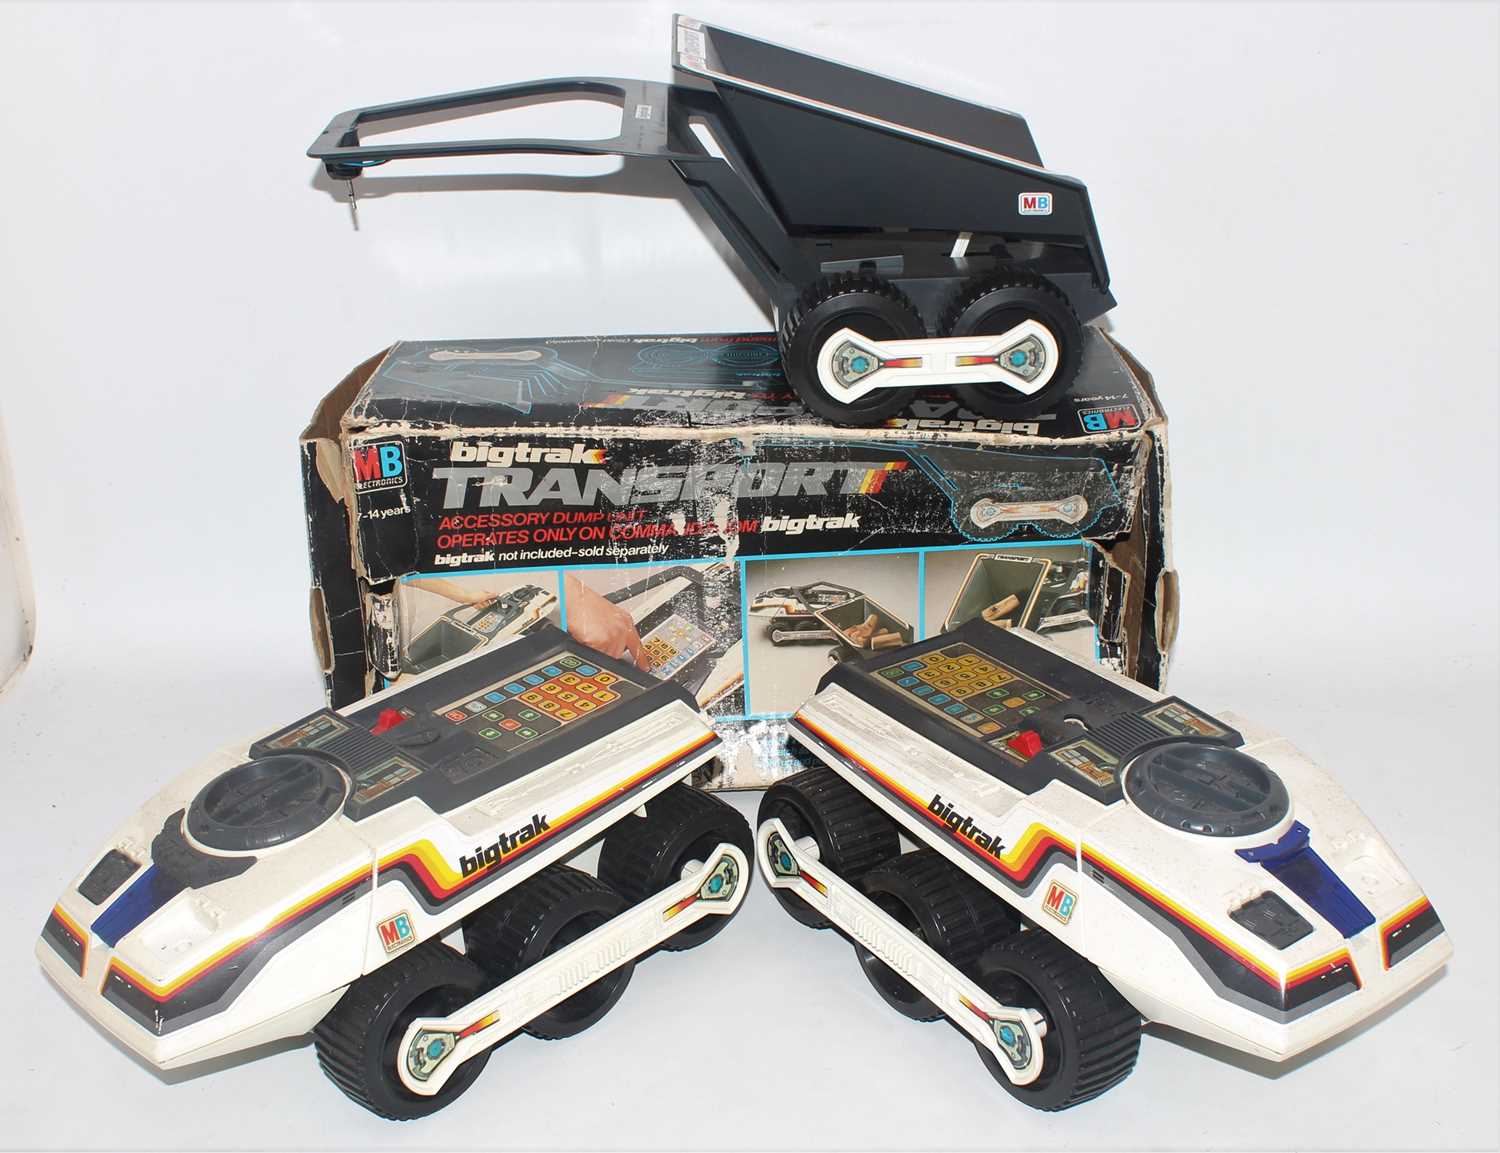 A collection of MB Electronics Bigtrak vehicles, one housed in the original box the others both